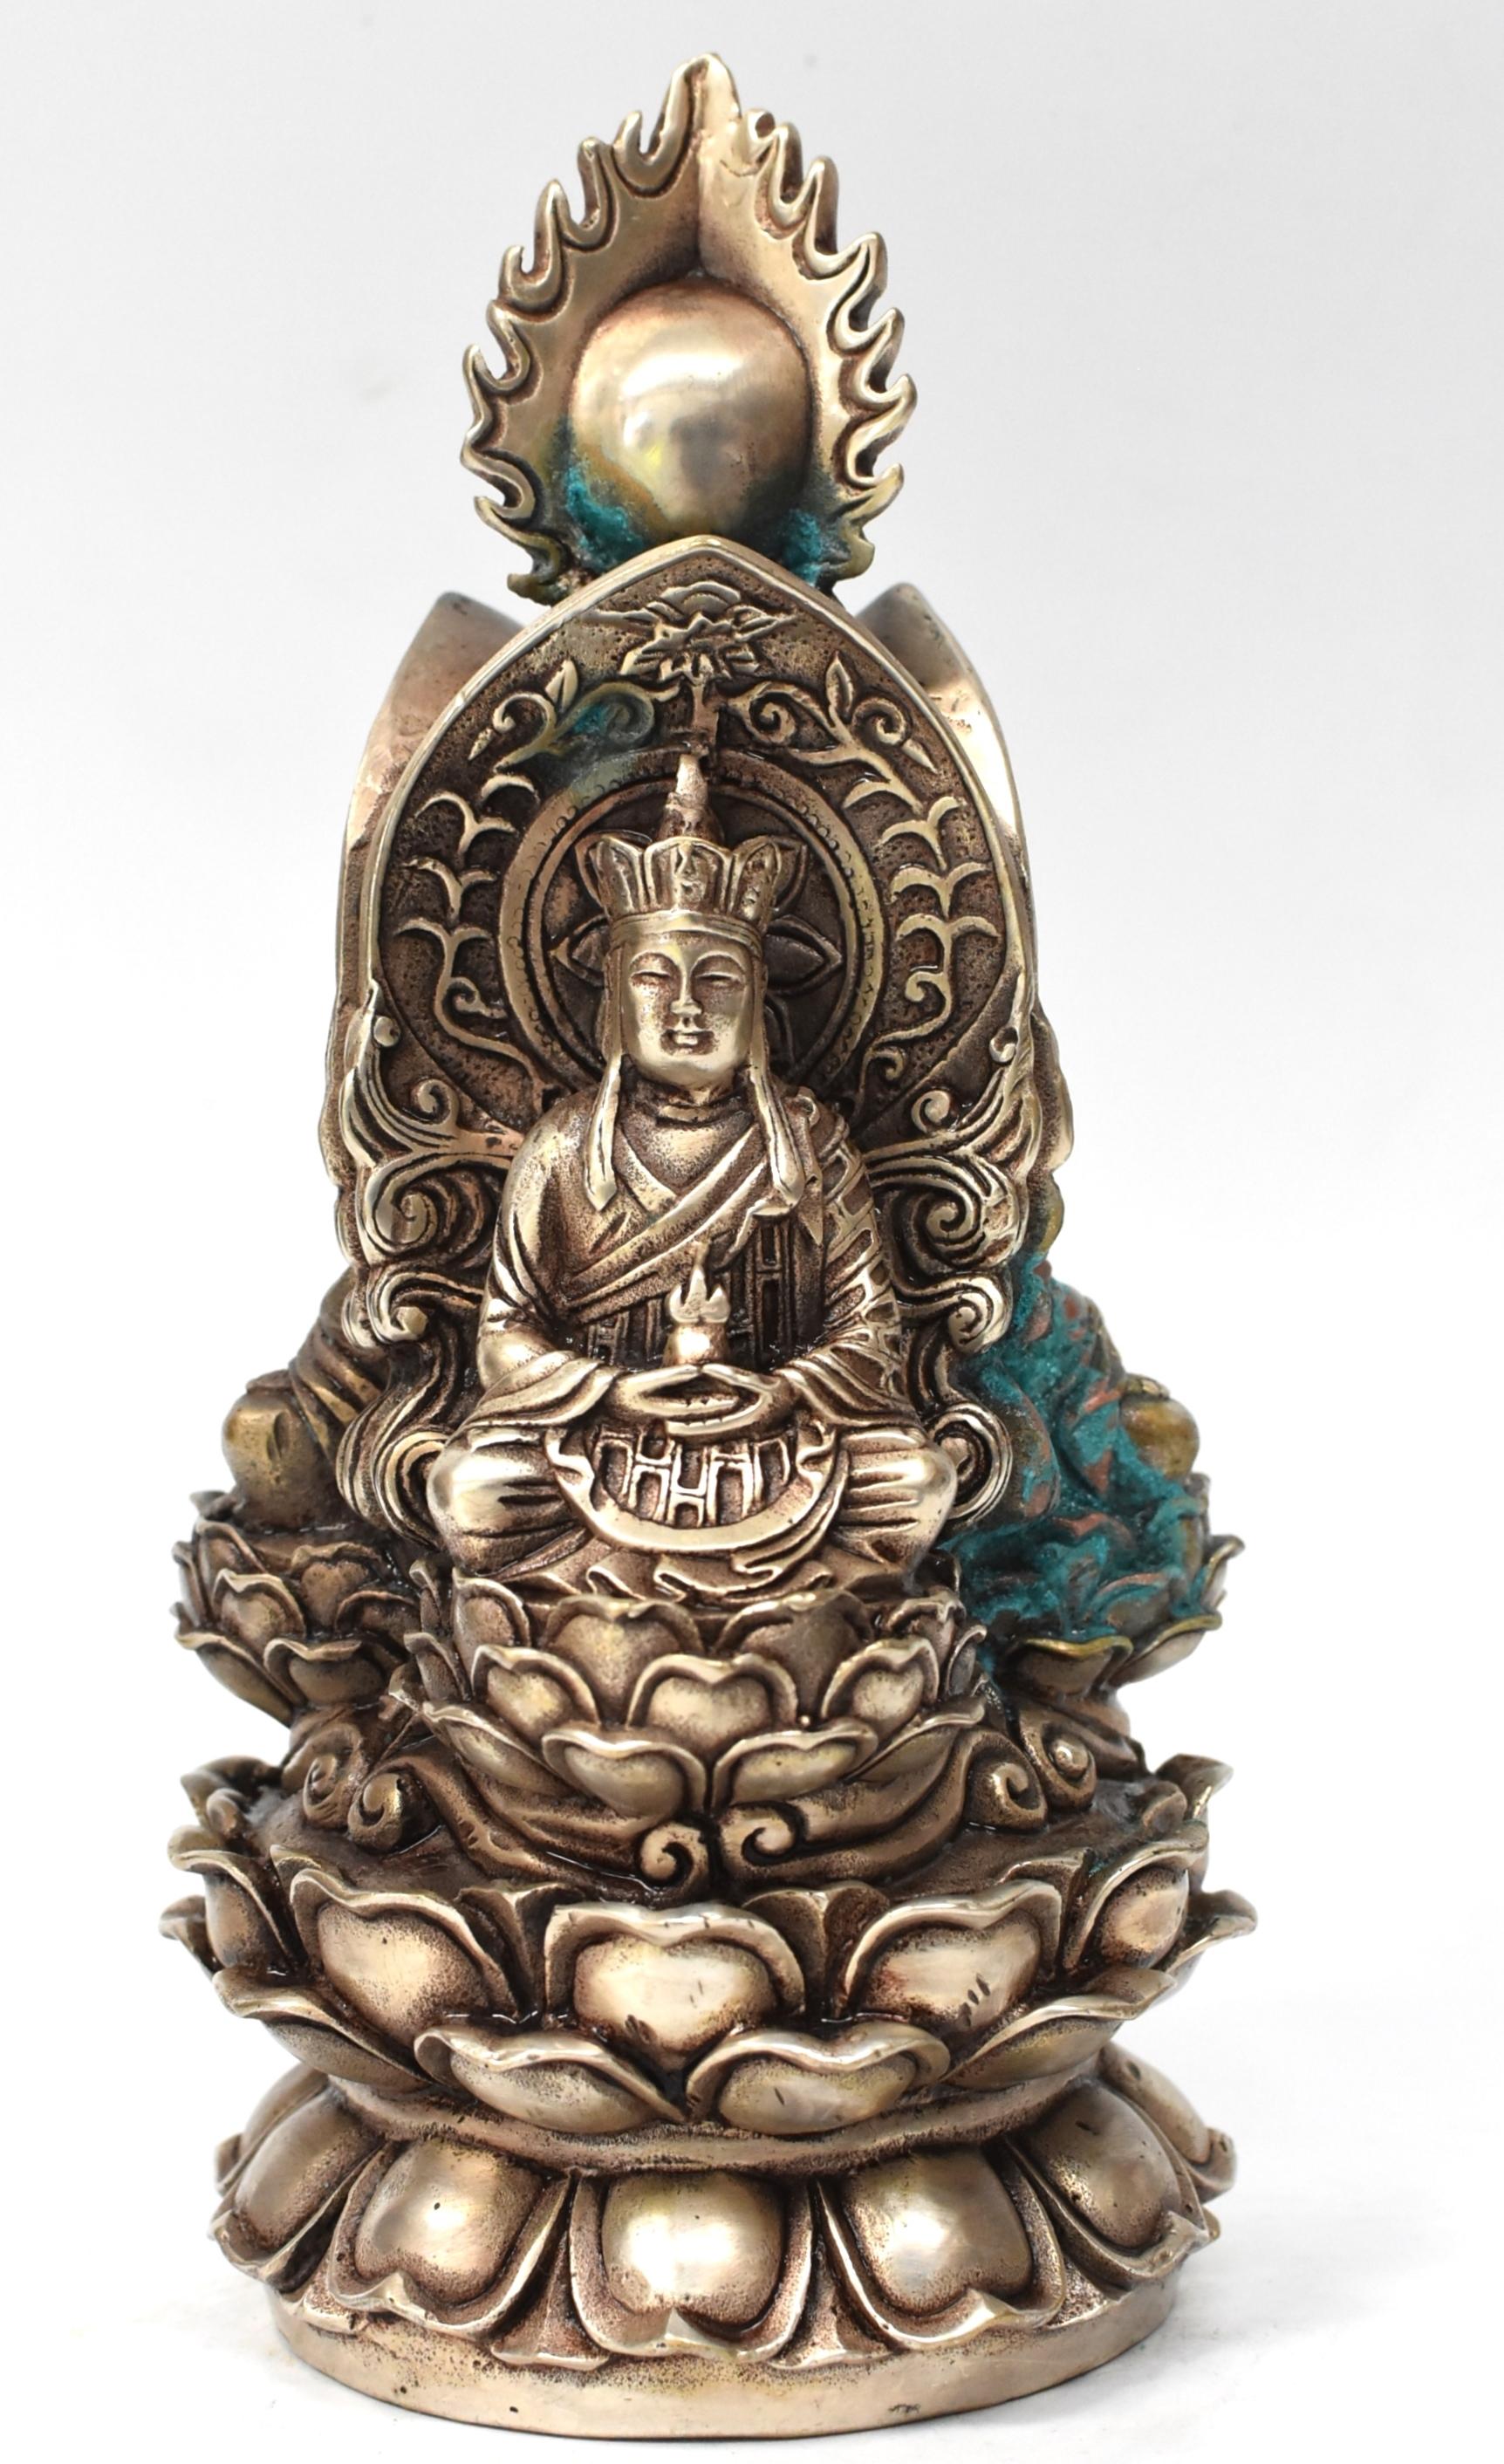 This is a very special, unique piece. The silver brass statue is a three sided Buddha statue featuring the Buddha, Buddha of Earth, Kwan Yin Goddess of Great Compassion. They are seated on a high lotus seat, in their respective alcove. A stylized